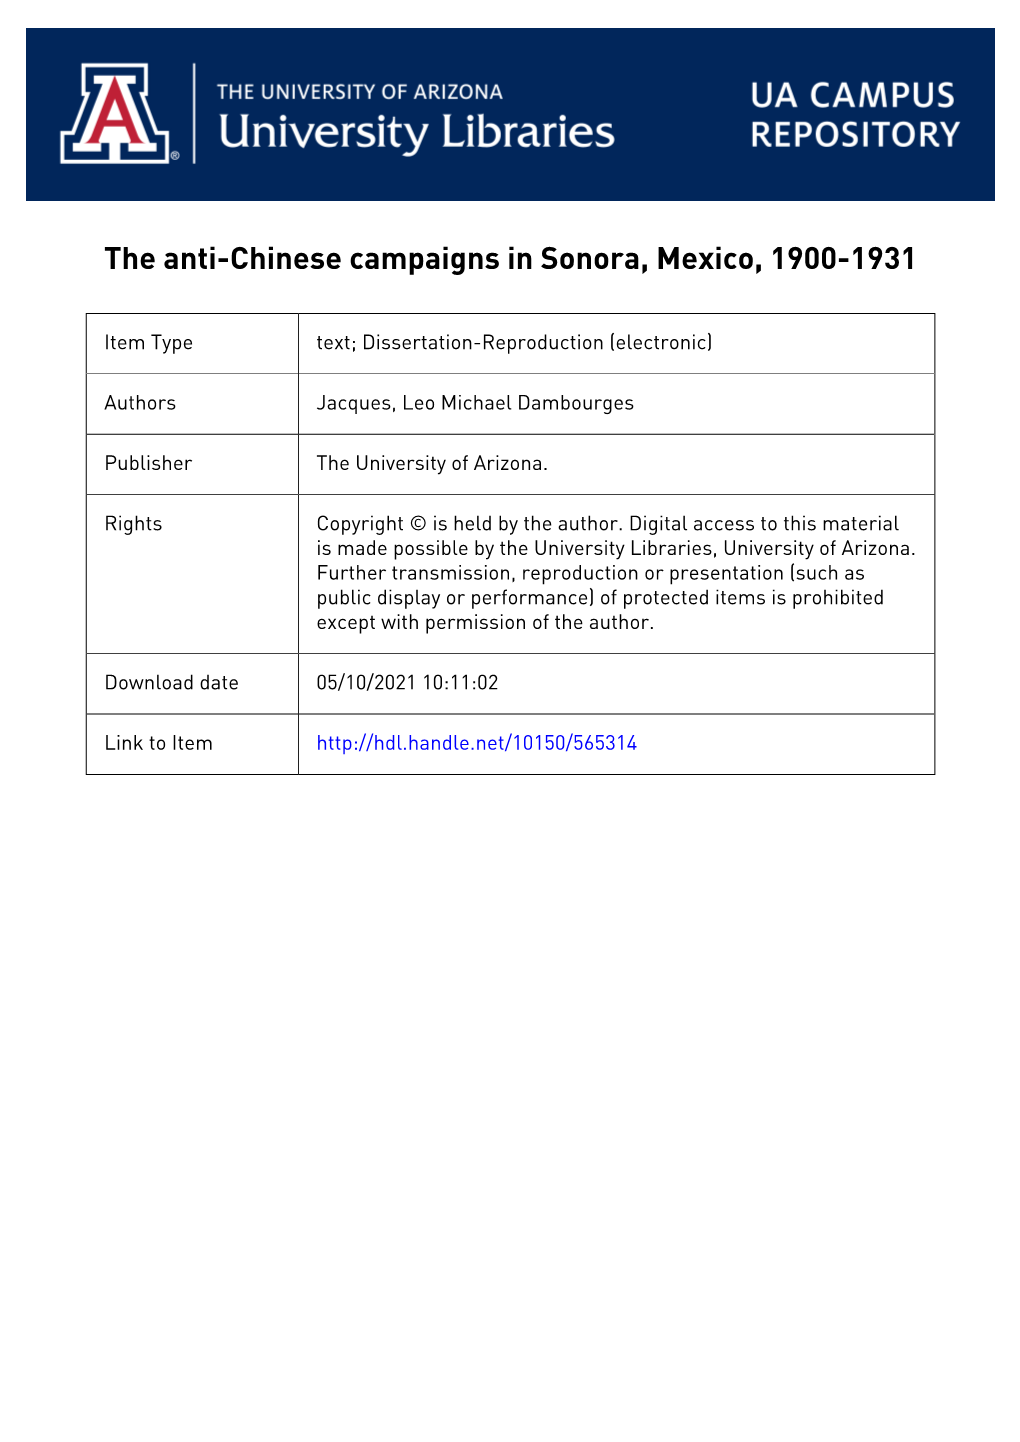 All Rights Reserved the Anti-Chinese Campaigns in Sonora